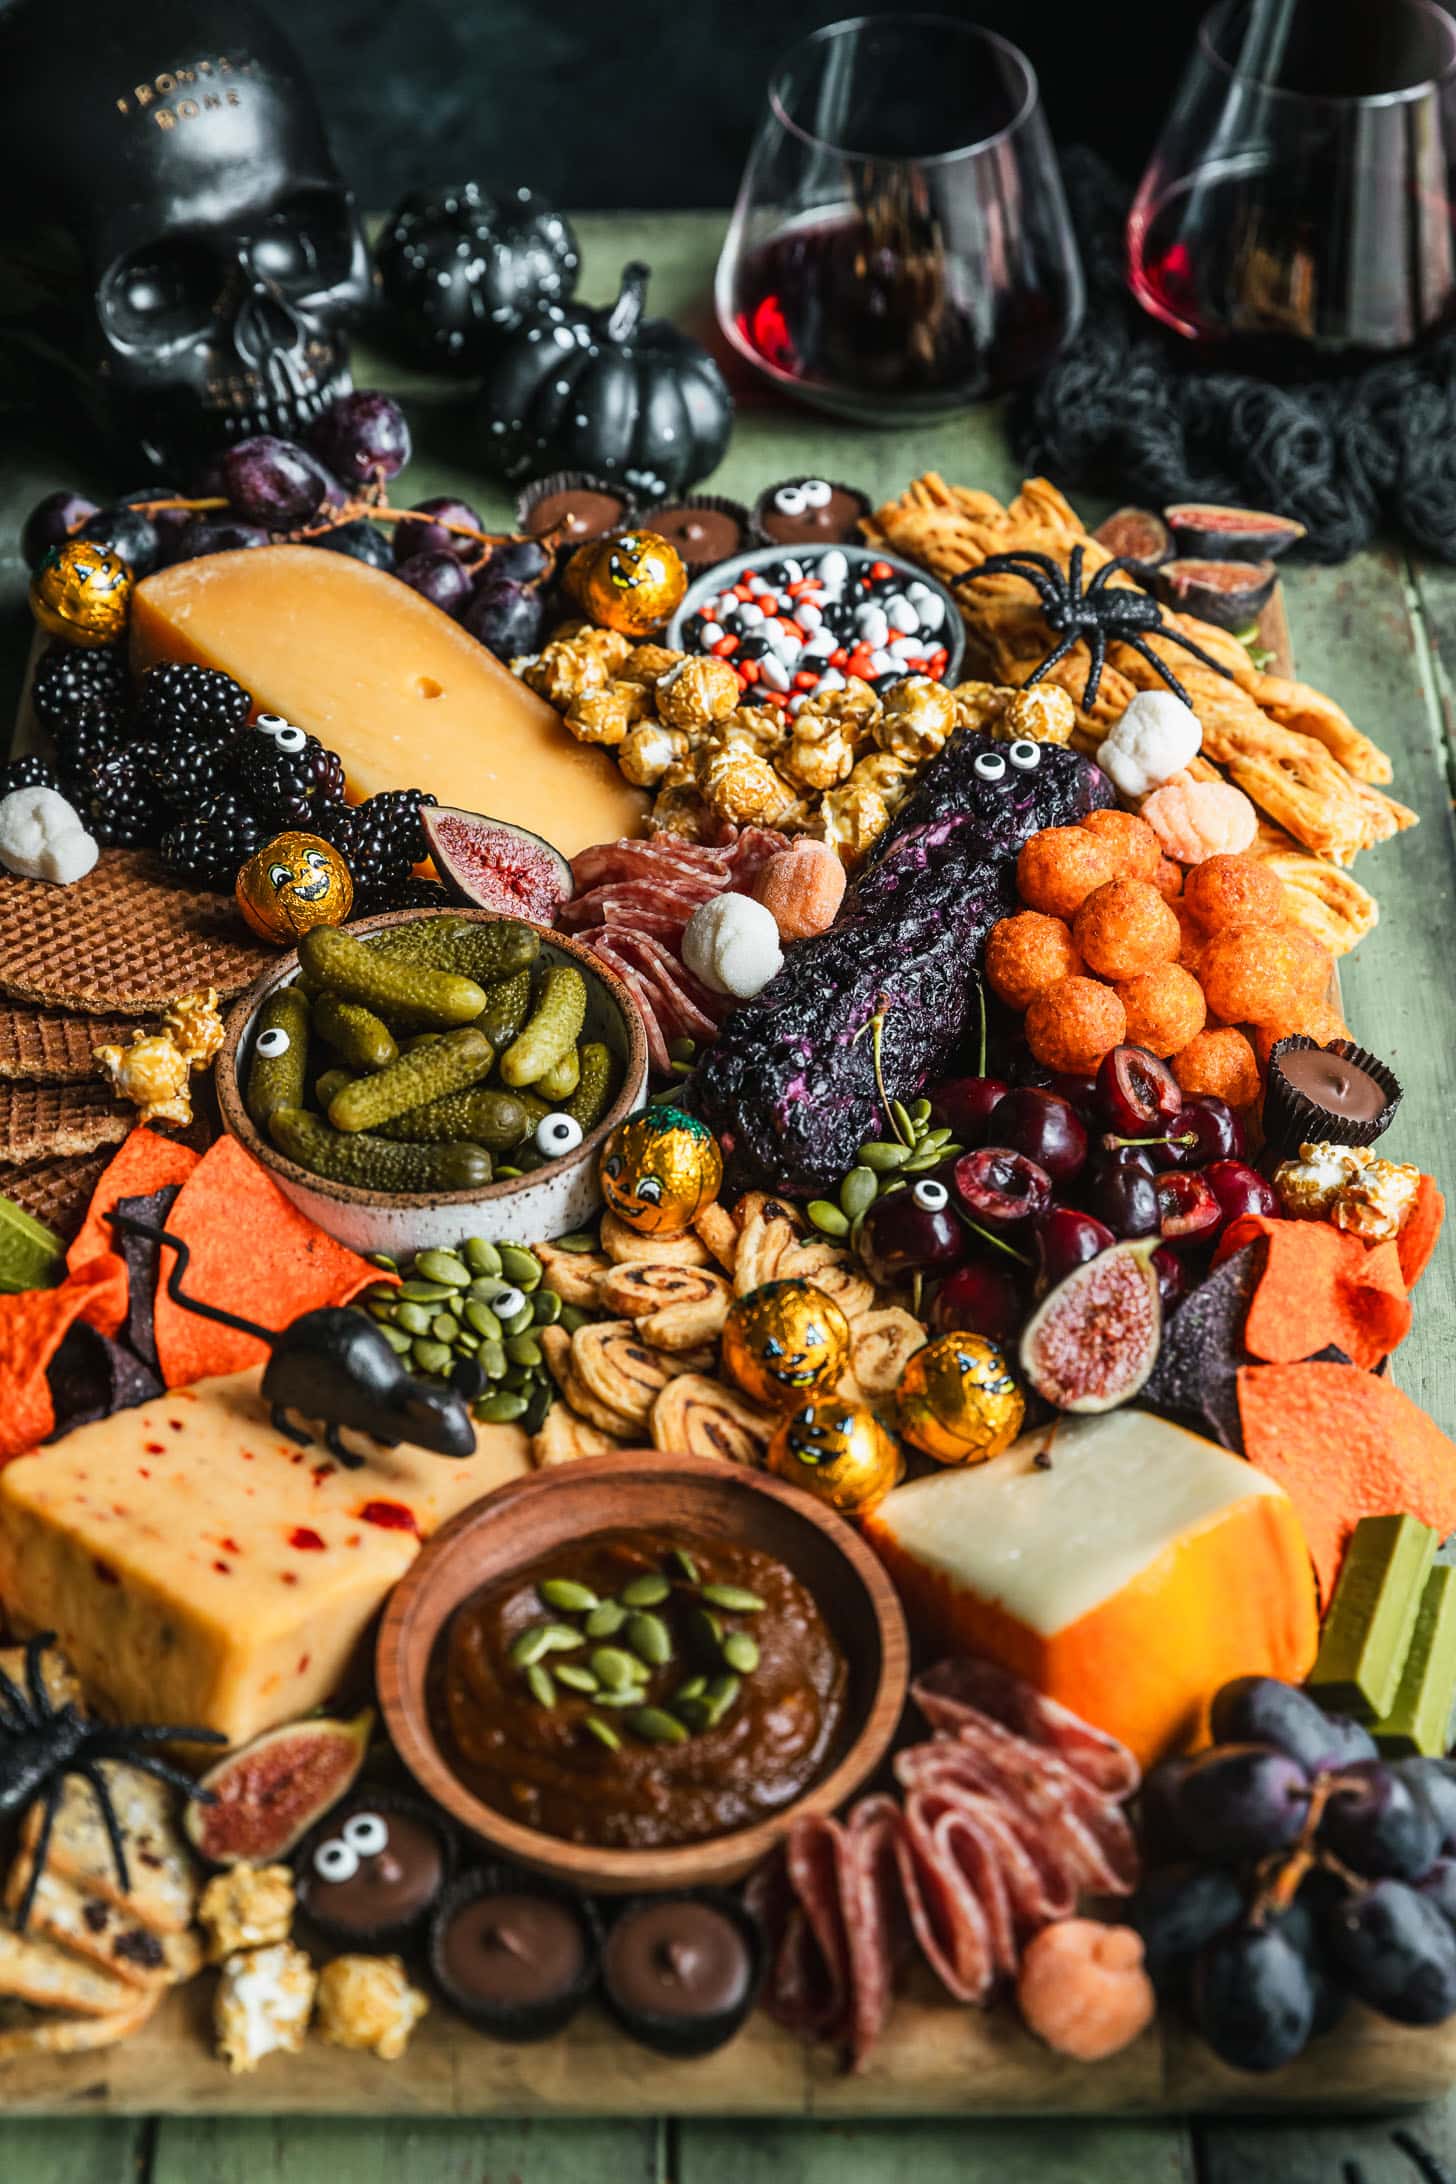 A Halloween charcuterie board on a green wood table next to a black skeleton, black pumpkins, and glasses of red wine.